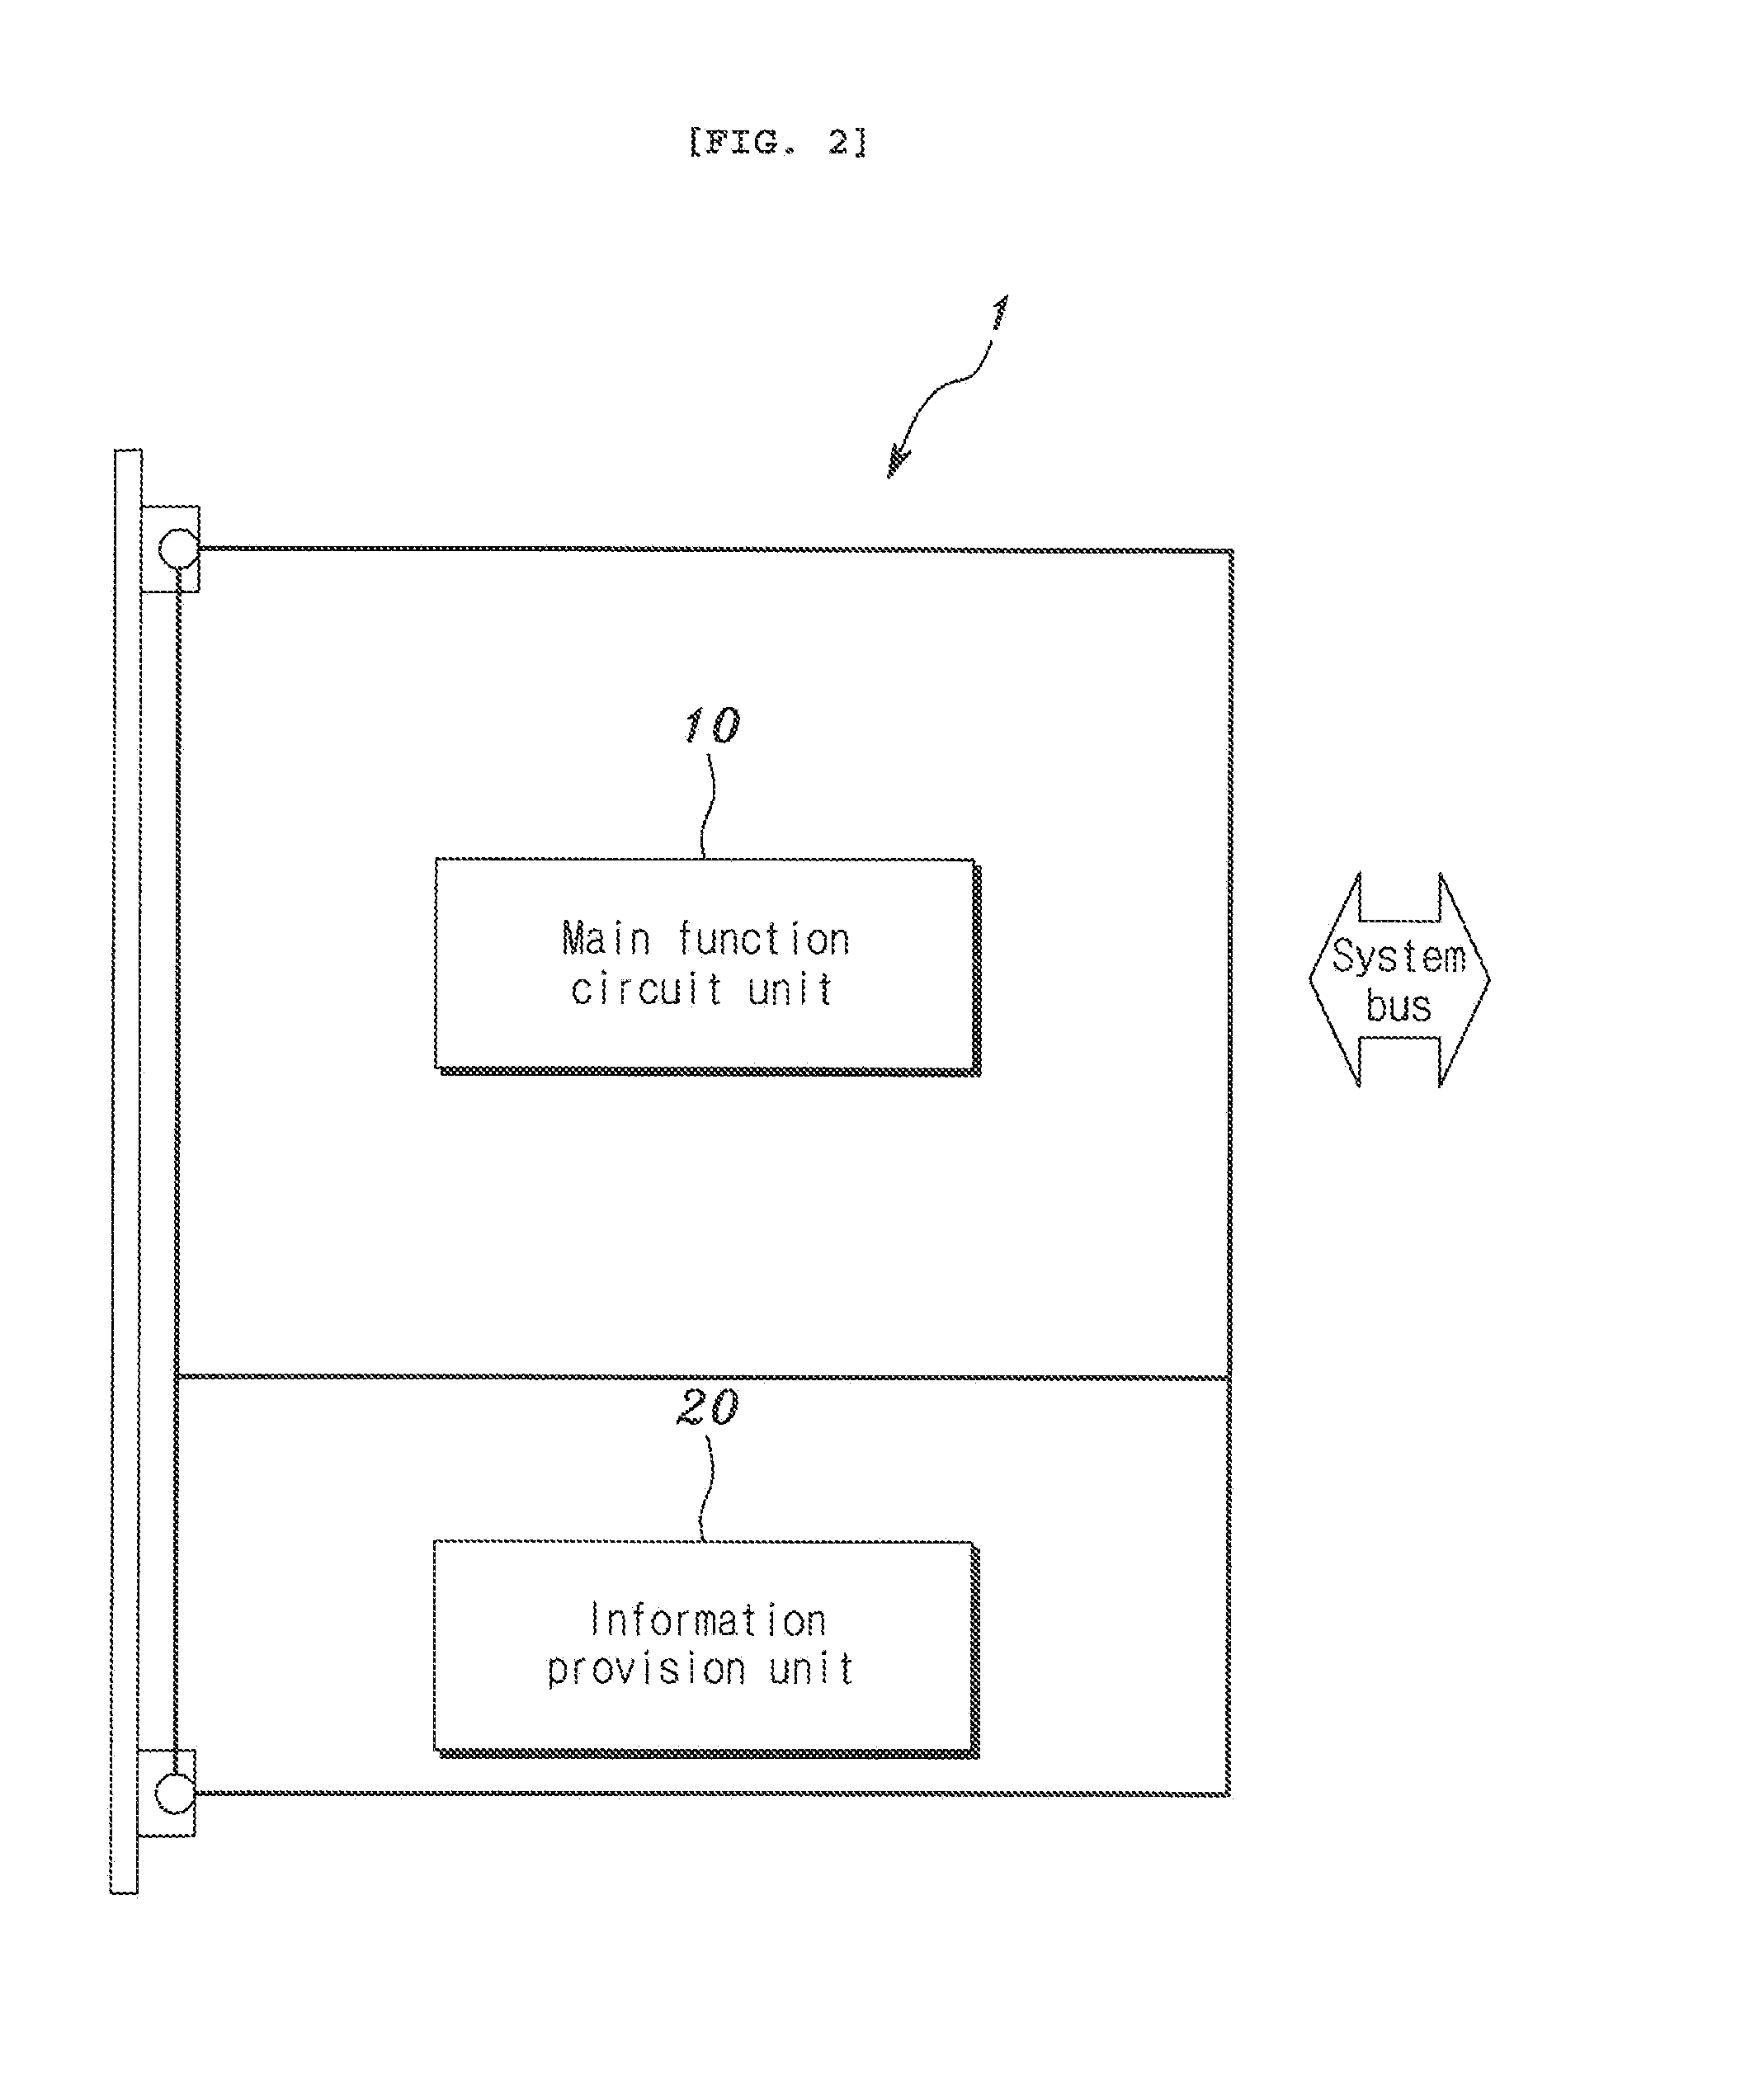 Electronic card module including function of storing information regarding fabrication/maintenance/driving of a product